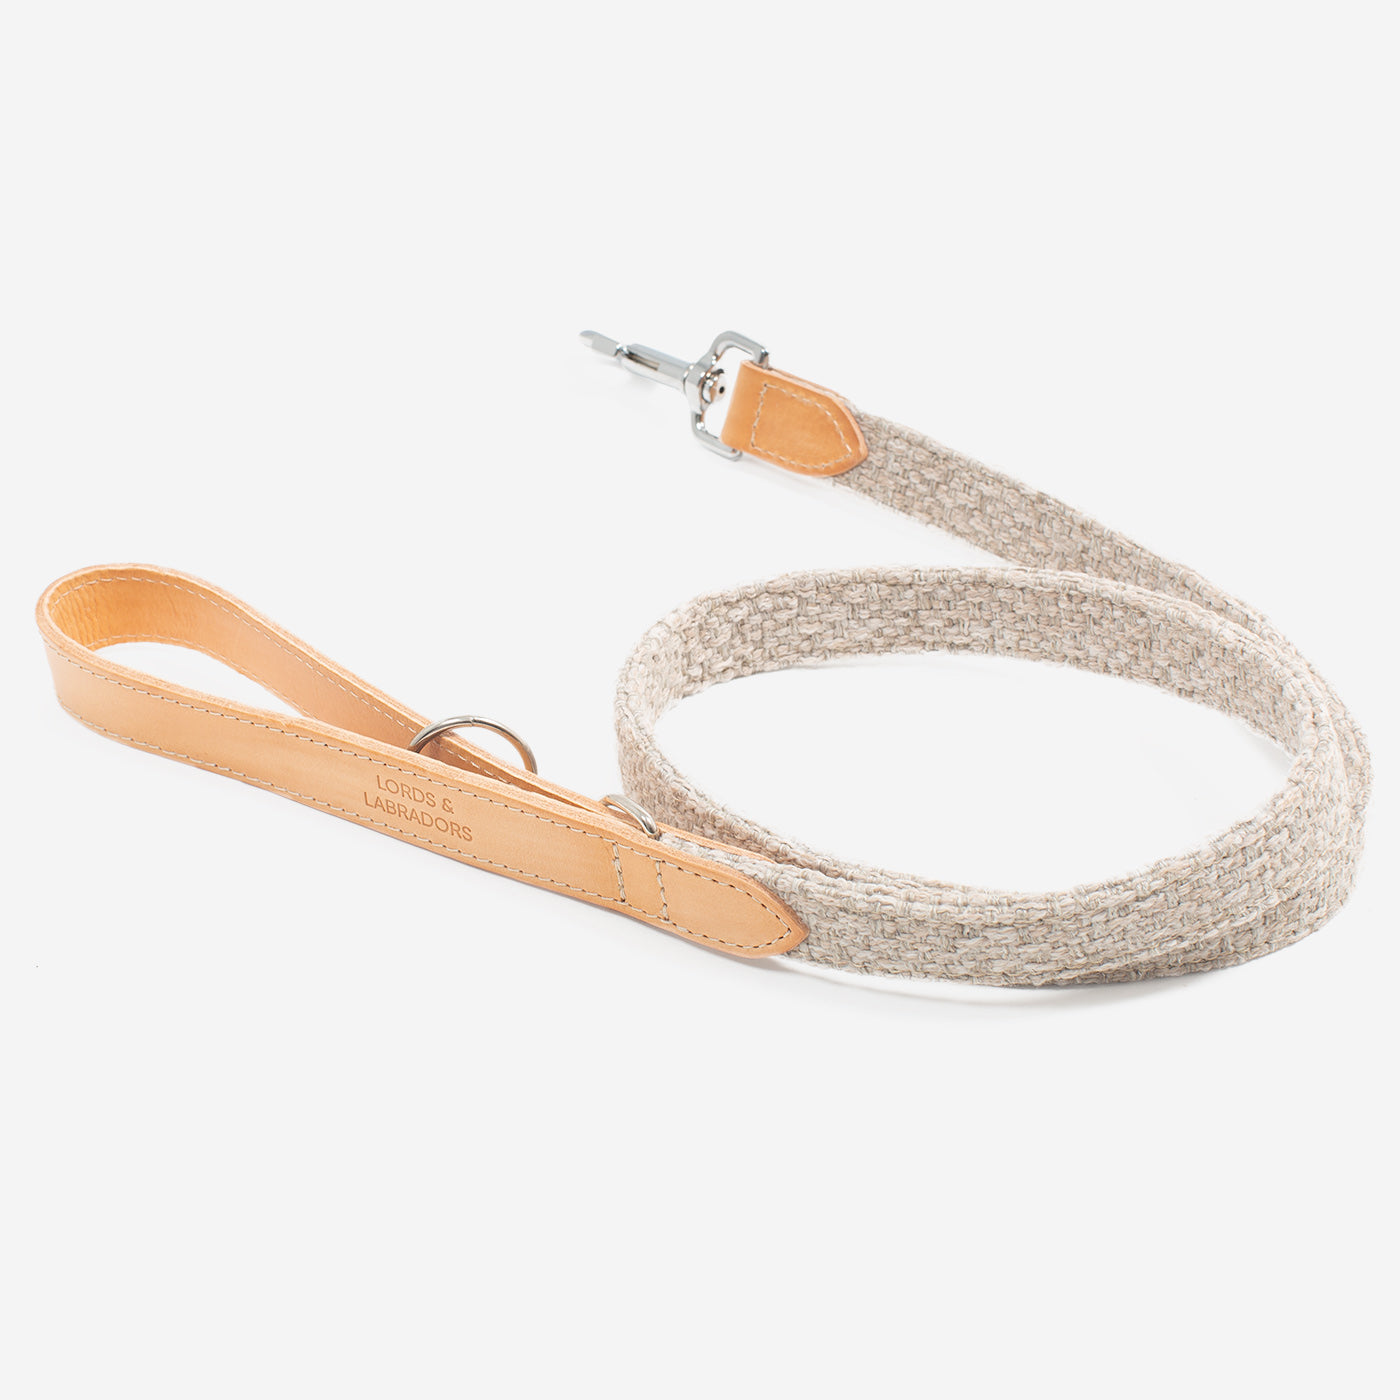 Discover dog walking luxury with our handcrafted Italian Herdwick dog leash in beautiful Sandstone with woven natural sandstone fabric! The perfect leash for dogs available now at Lords & Labradors US